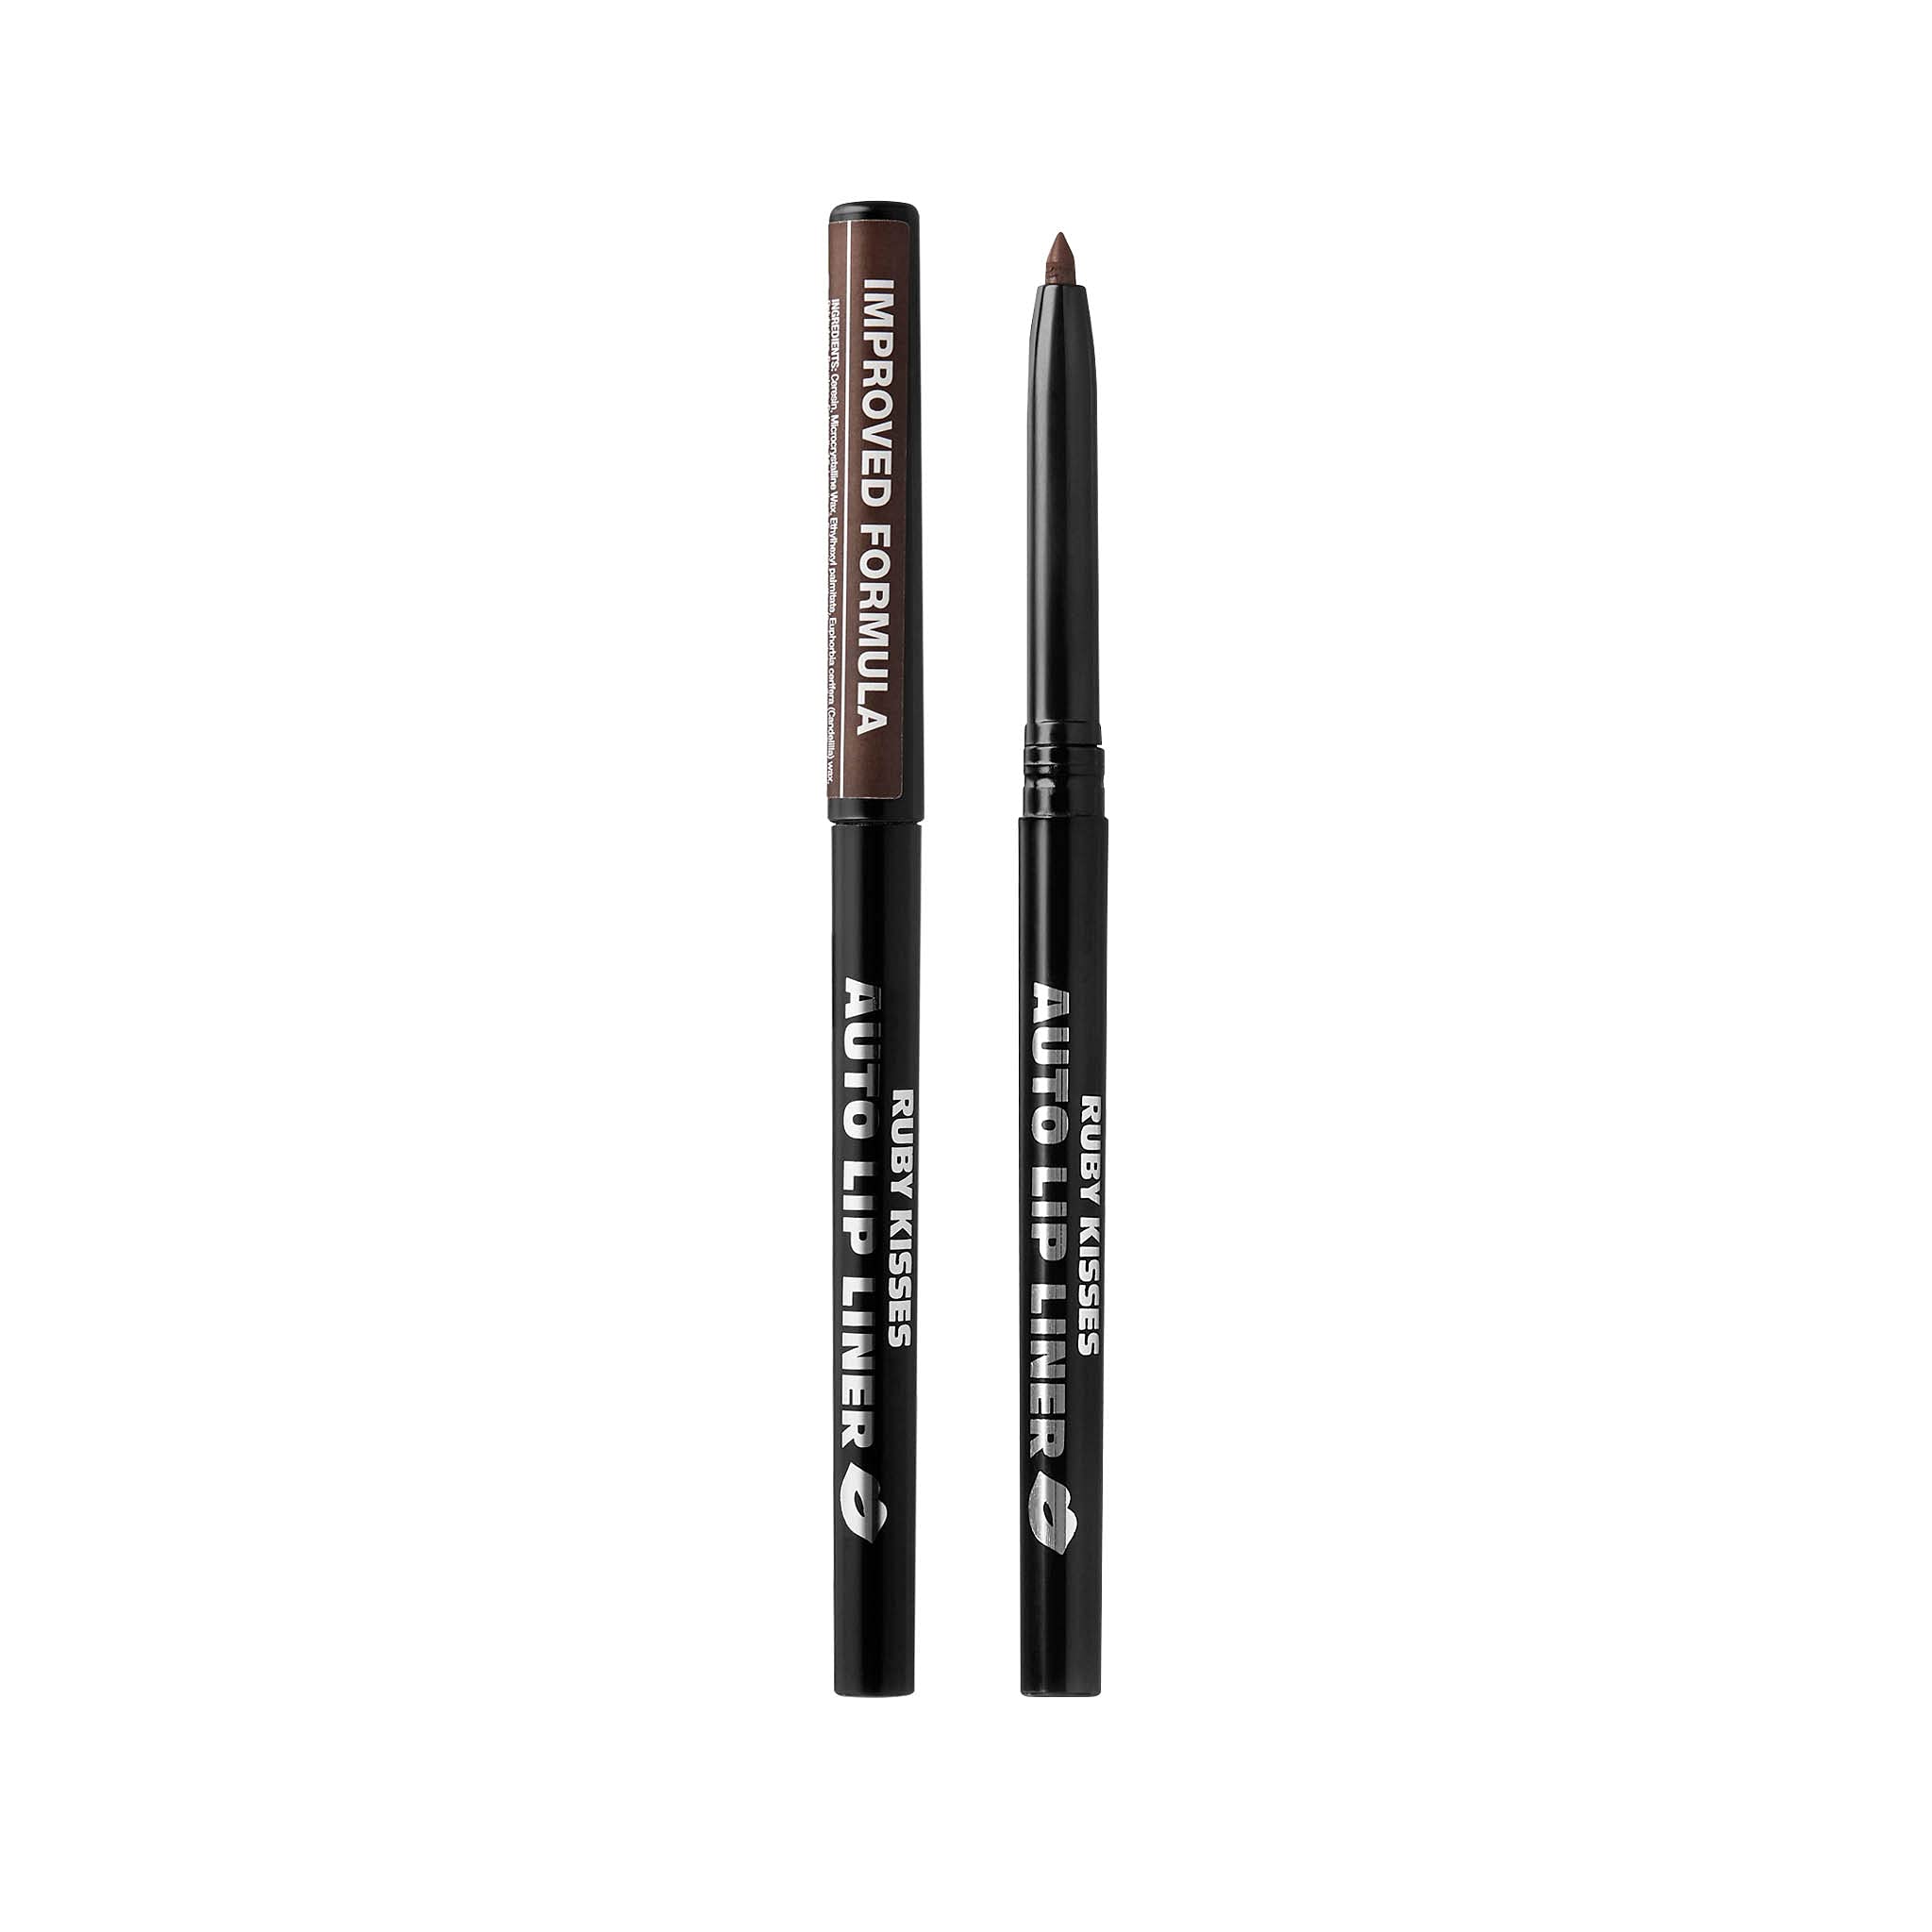 Ruby Kisses Auto Lip Liner Pencil, Long Lasting & Non-Fading, Smooth Application, Non-Feathering with Rich Color, No Sharpener Needed, Ideal for Full Lips Look (Dark Brown)